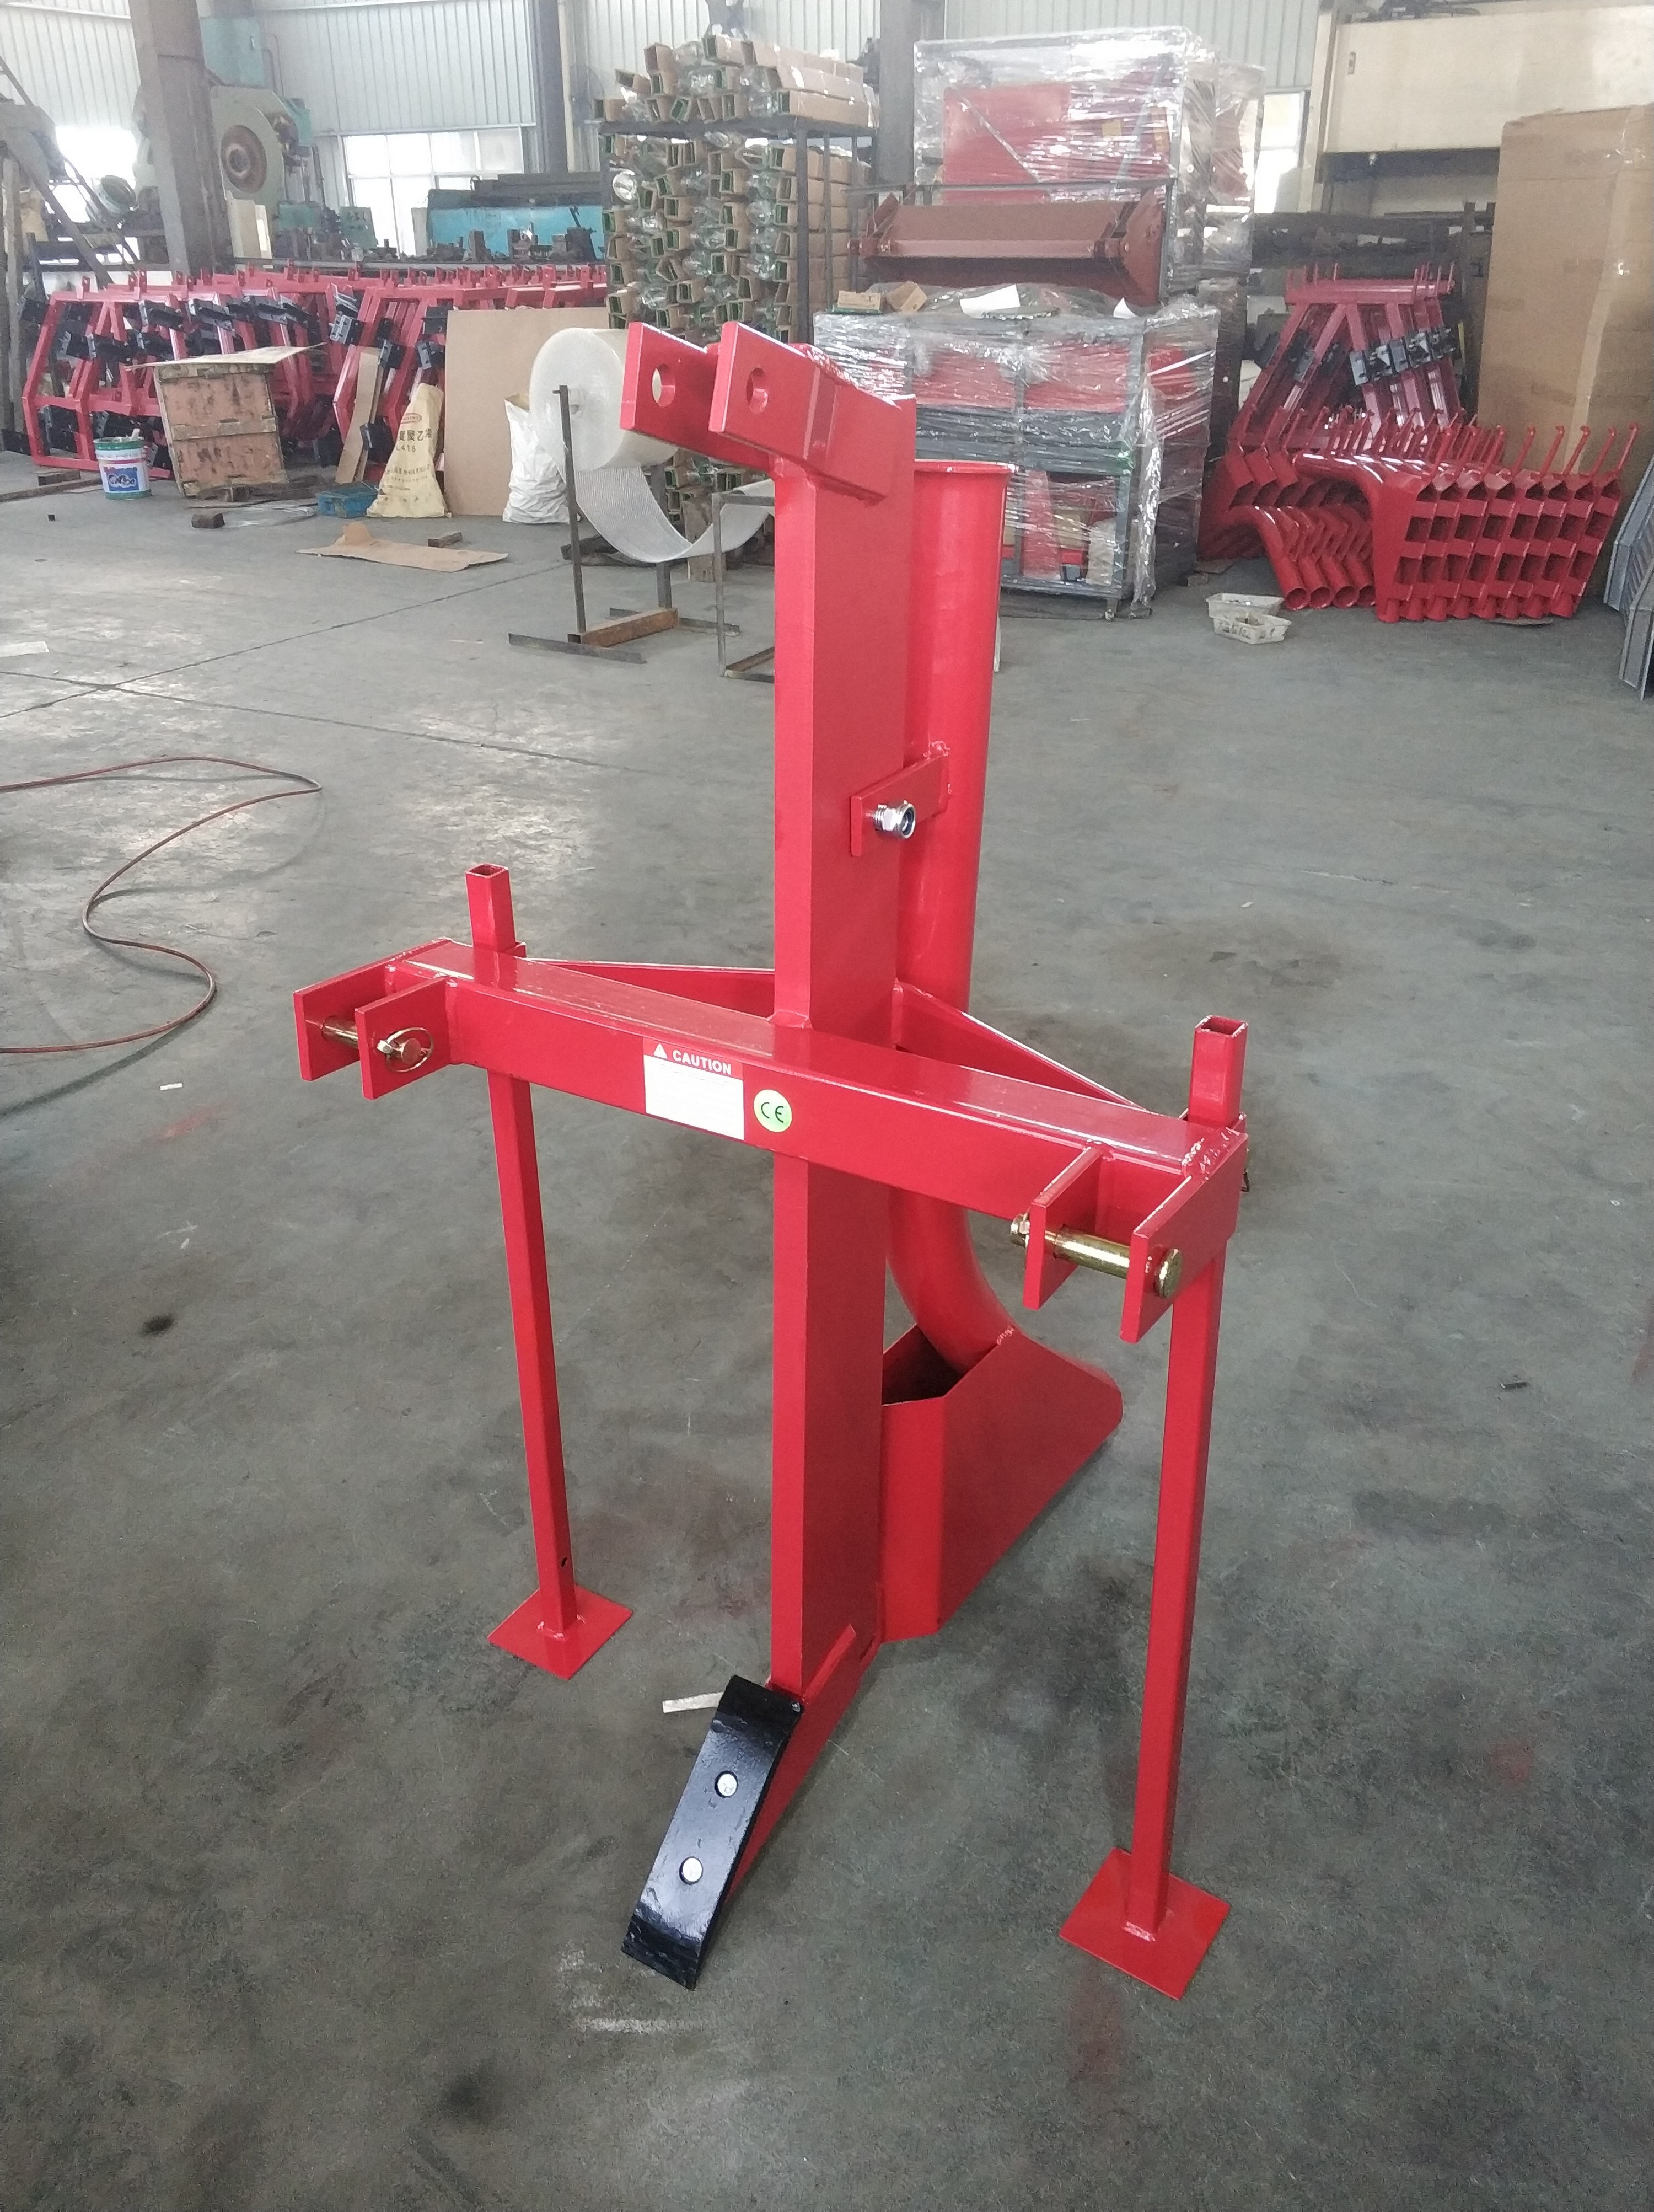 FarmTractor Pipelayer Ripper For Tractor 3 Point Single Tine Ripper